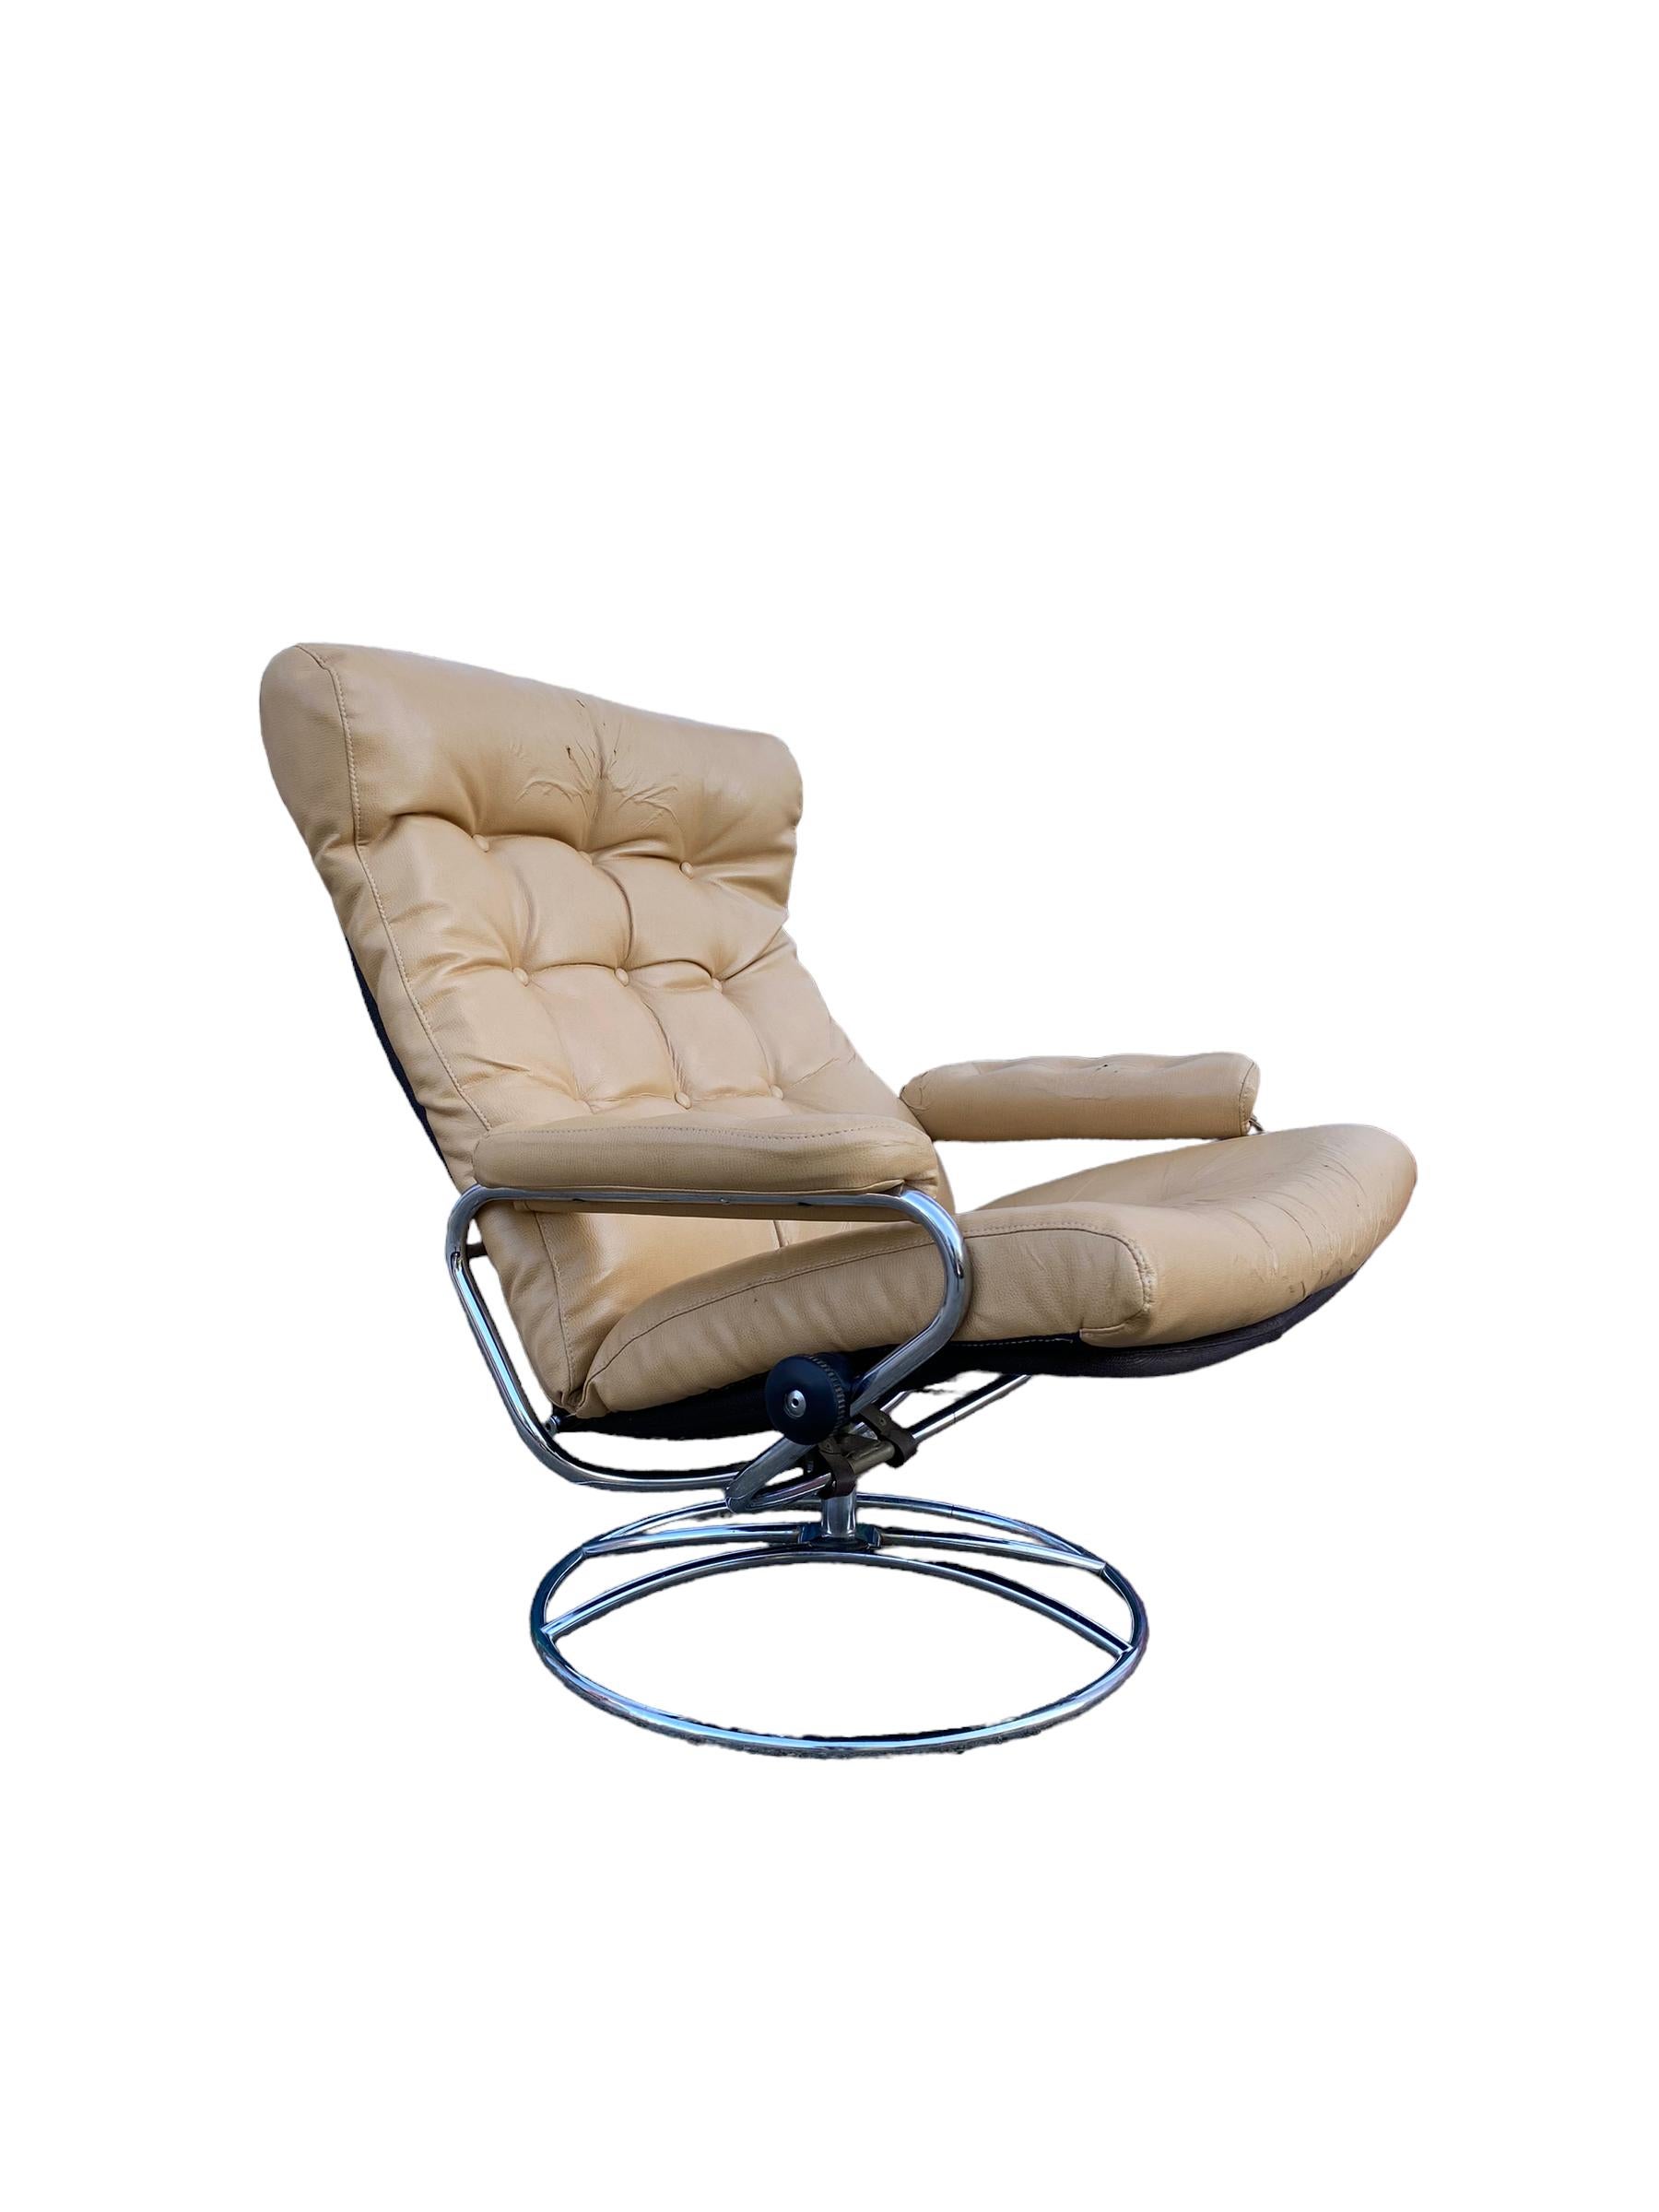 stressless chairs canada price